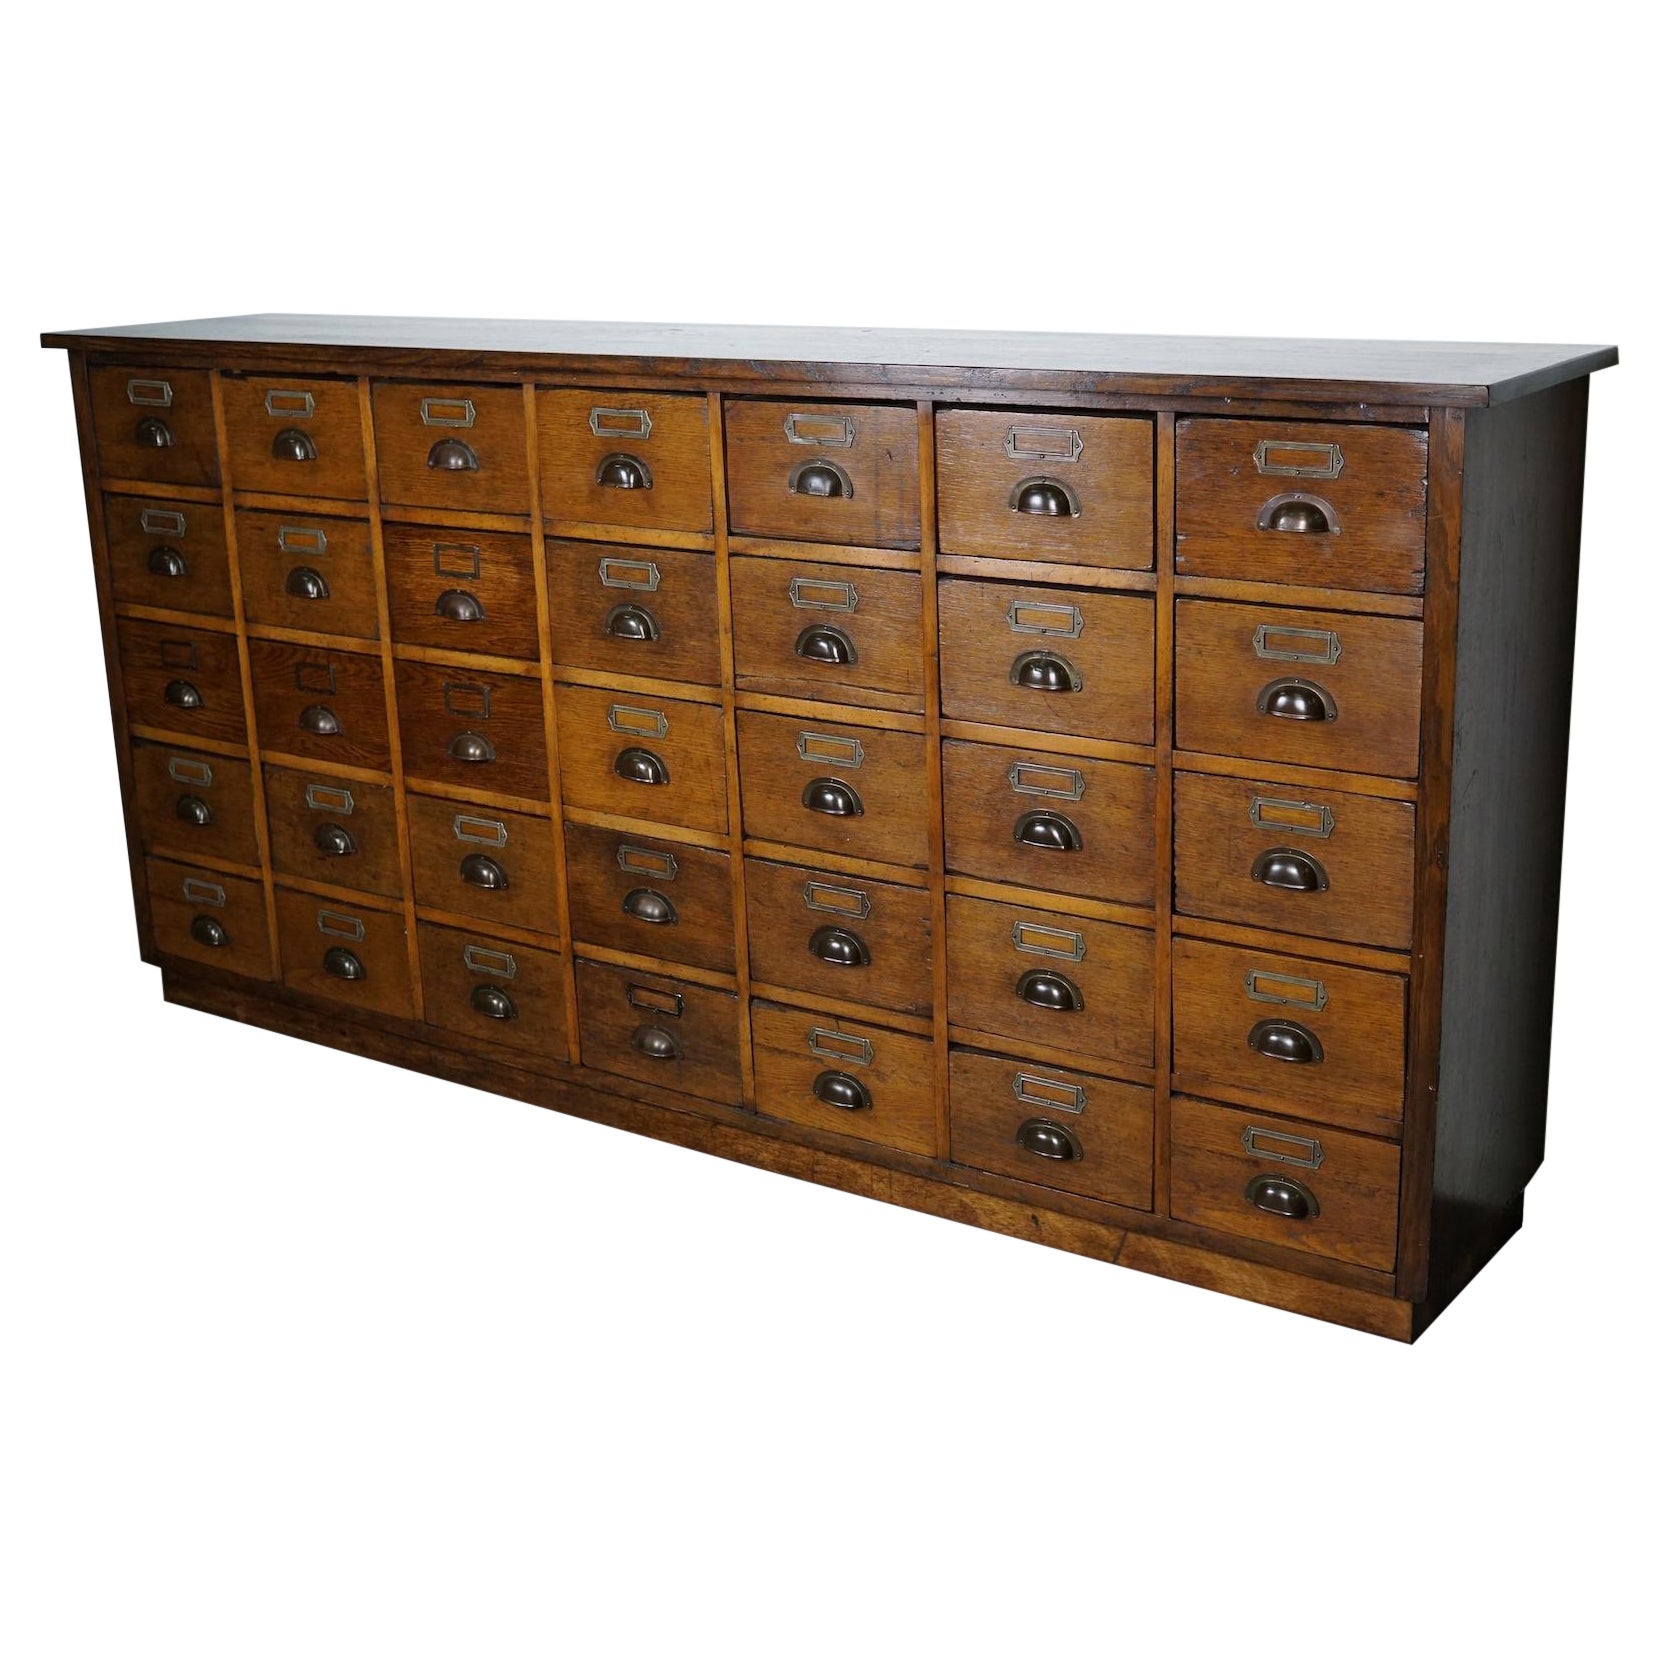 Large German Industrial Oak Apothecary Cabinet / Bank of Drawers, 1930s